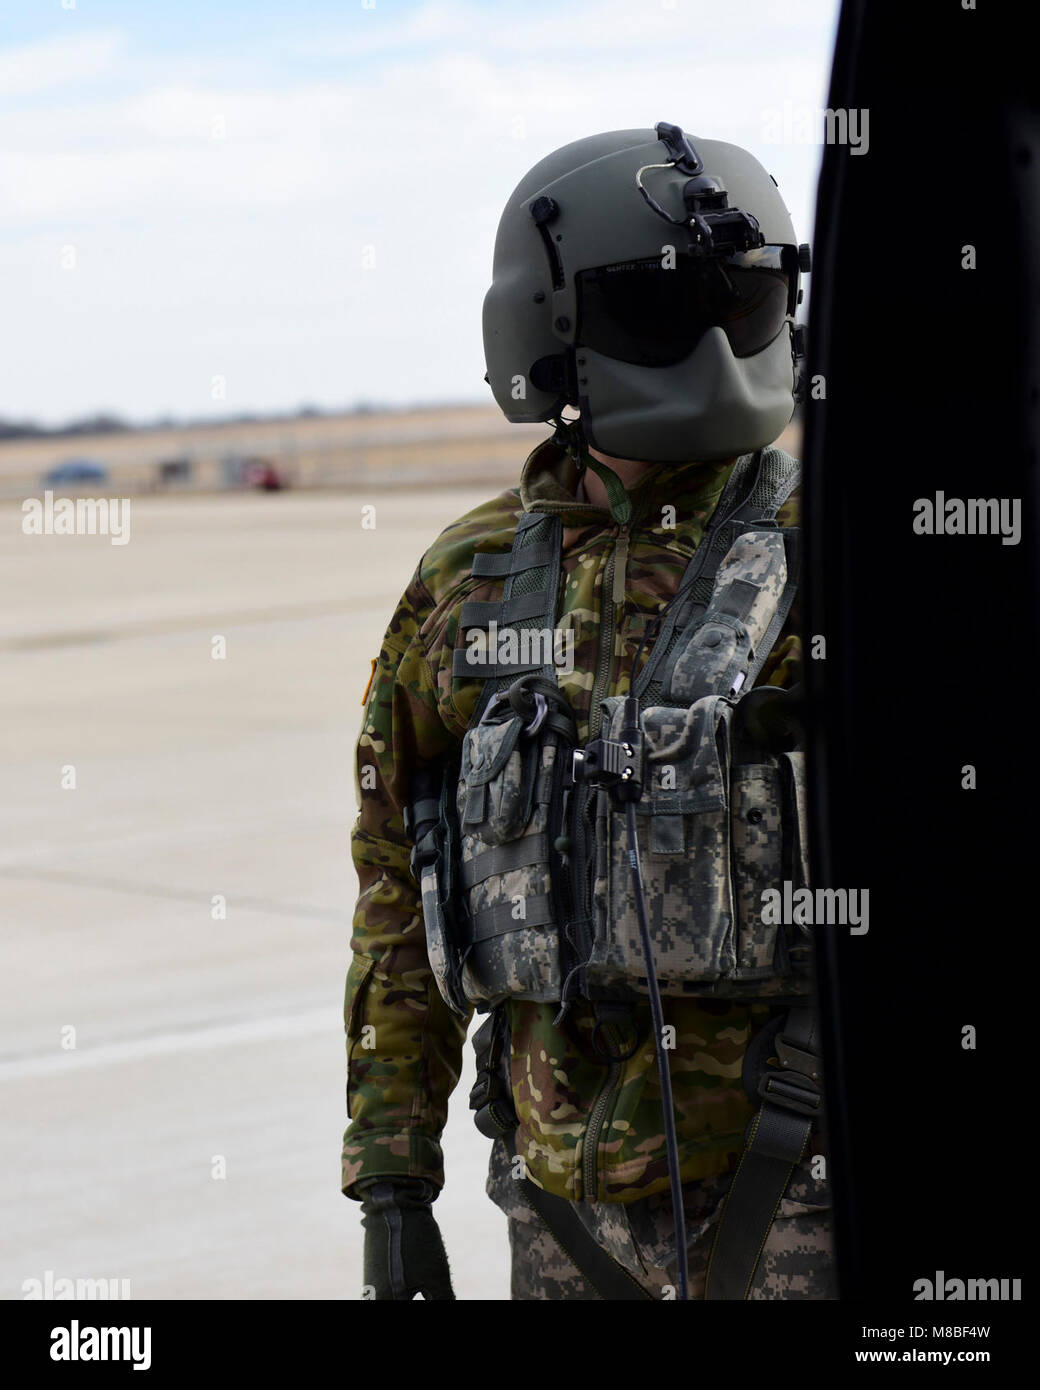 A U.S. Army crew chief with the 1-135th Assault Helicopter Battalion monitors a UH-60 Black Hawk before take off during a joint training at Whiteman Air Force Base, Mo., Jan. 31, 2018. In addition to establishing a partnership, the purpose of the training was to familiarize Joint Terminal Attack Controllers from the 7th Air Support Operations Squadron located in Fort Bliss, Texas, with the assets available at Whiteman AFB that are used in a multi-domain fight. (U.S. Air Force by Staff Sgt. Danielle Quilla) Stock Photo